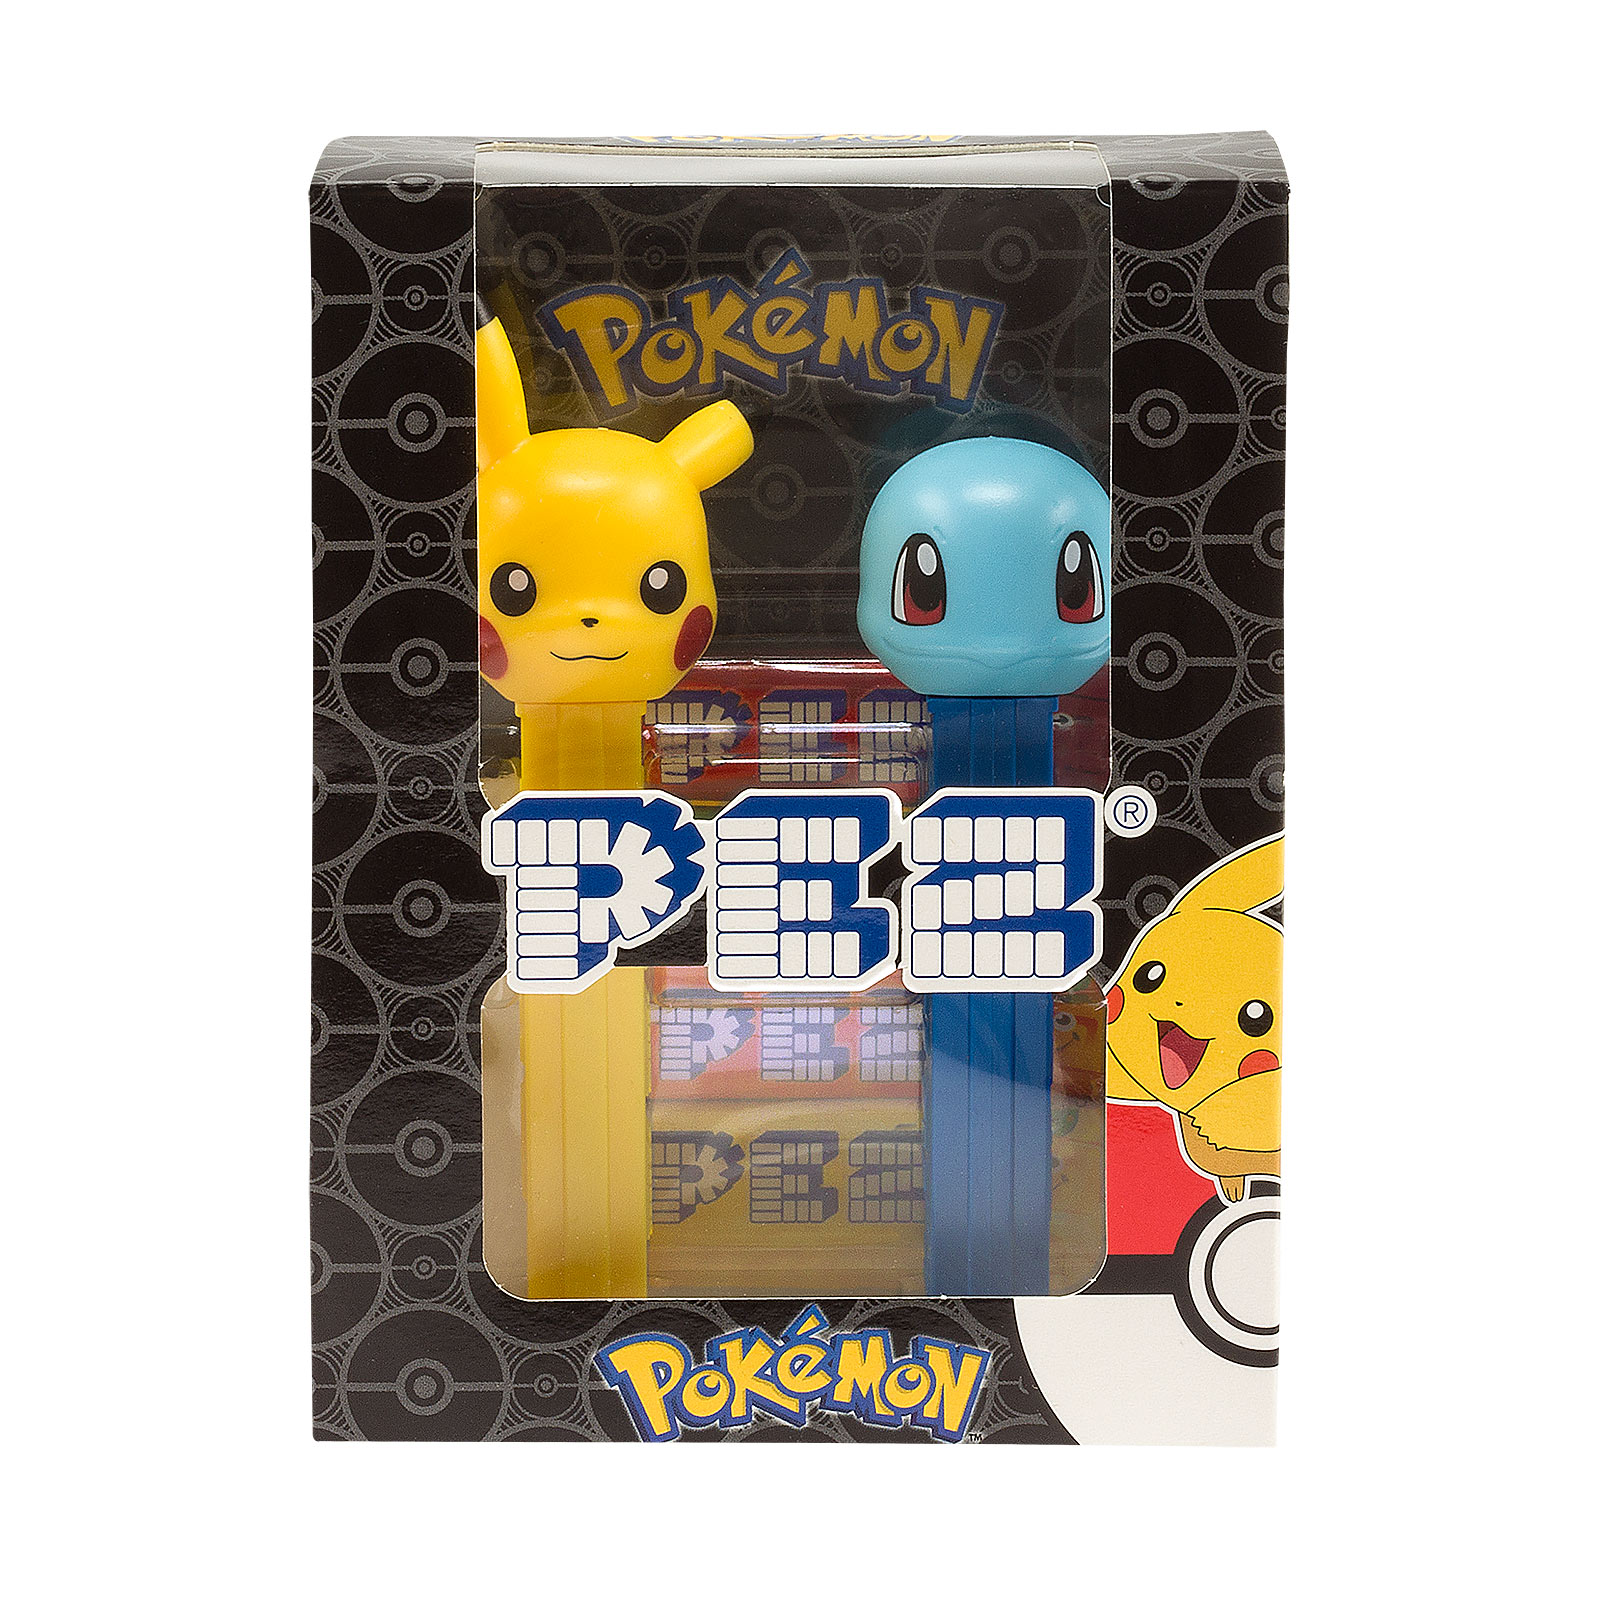 Pokemon - PEZ Candies 4 Pack with 2 Dispensers